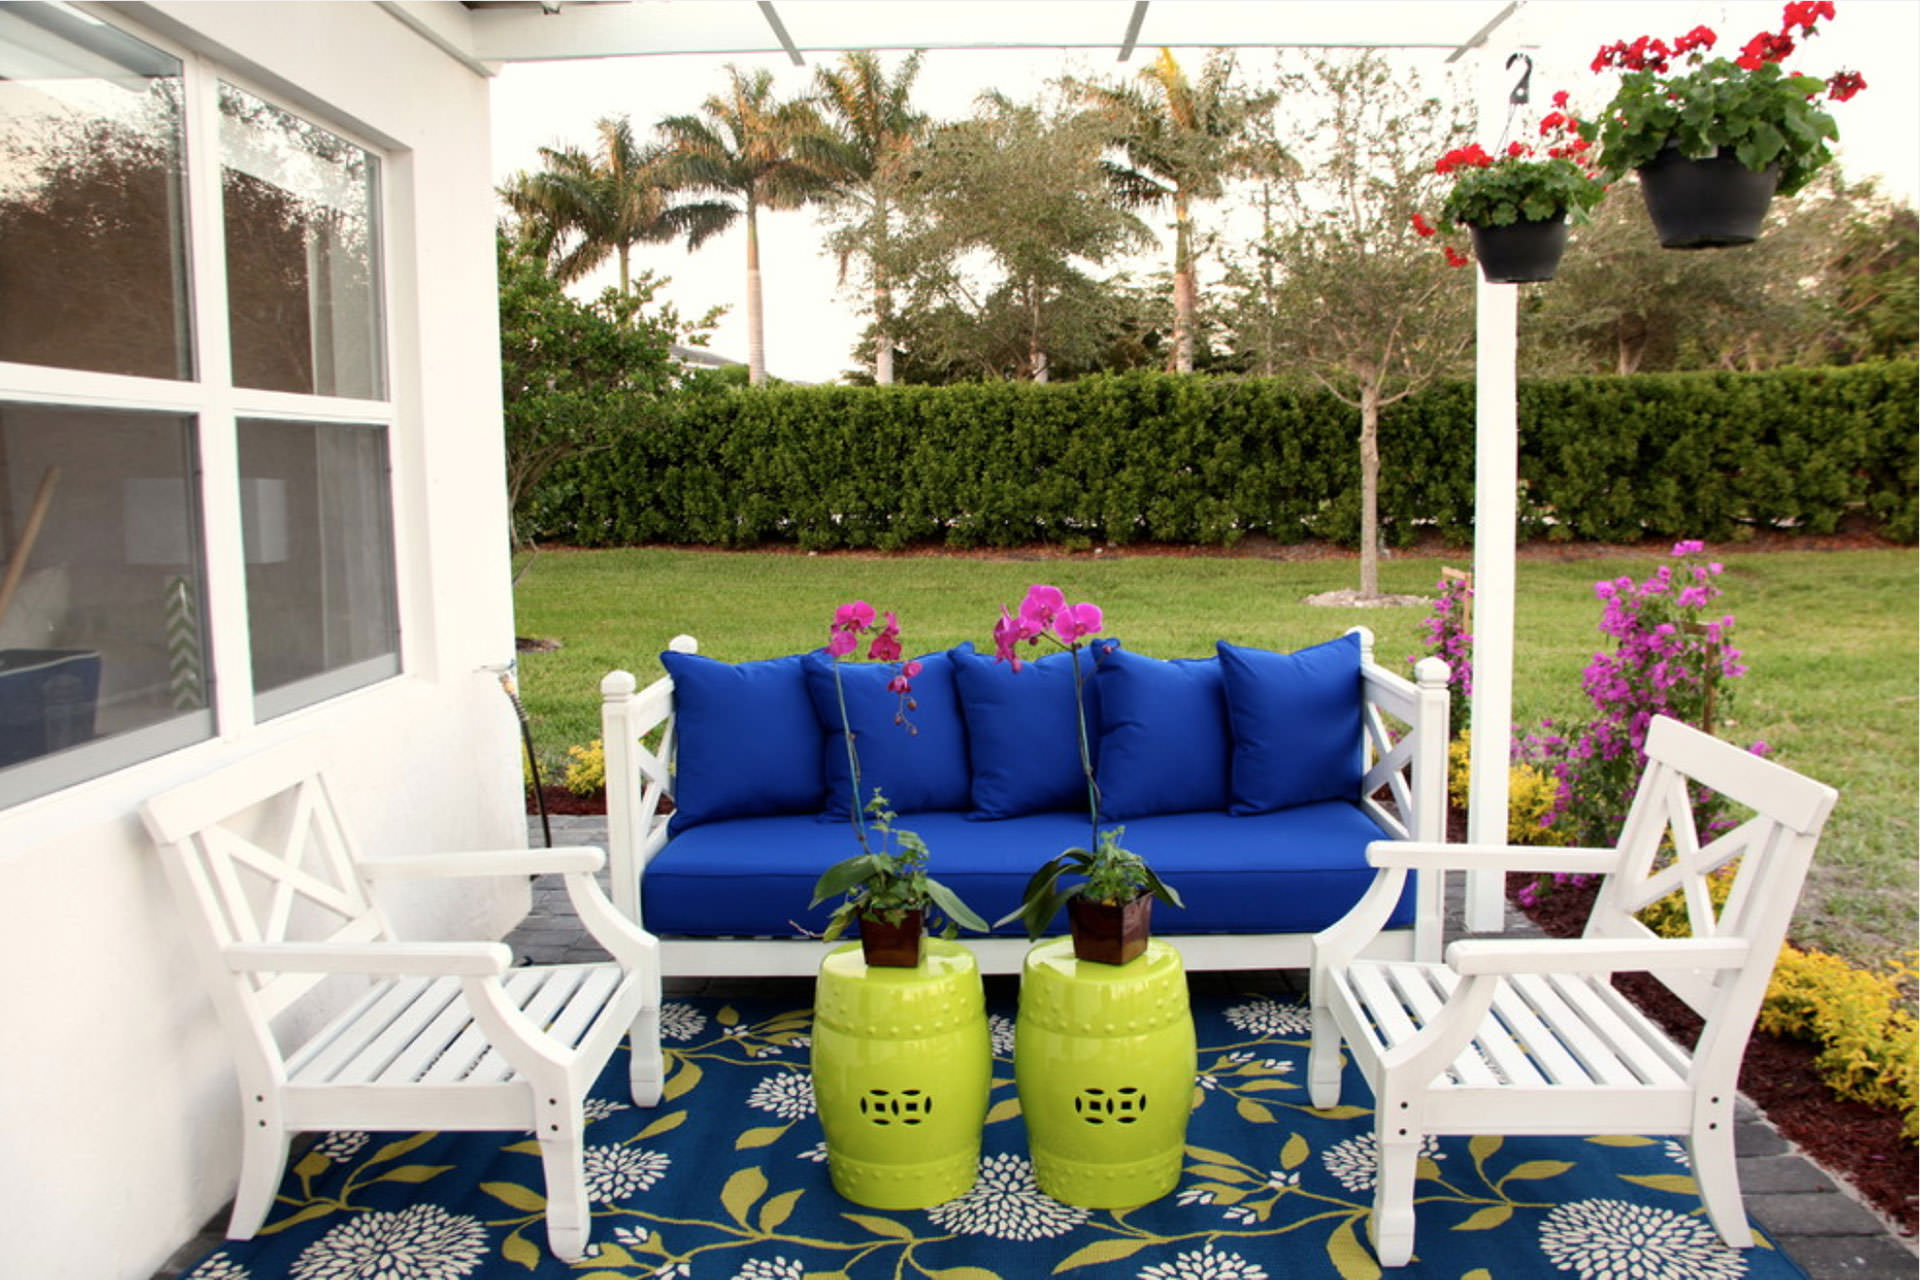 Five Accessories to Personalize Your Outdoor Space